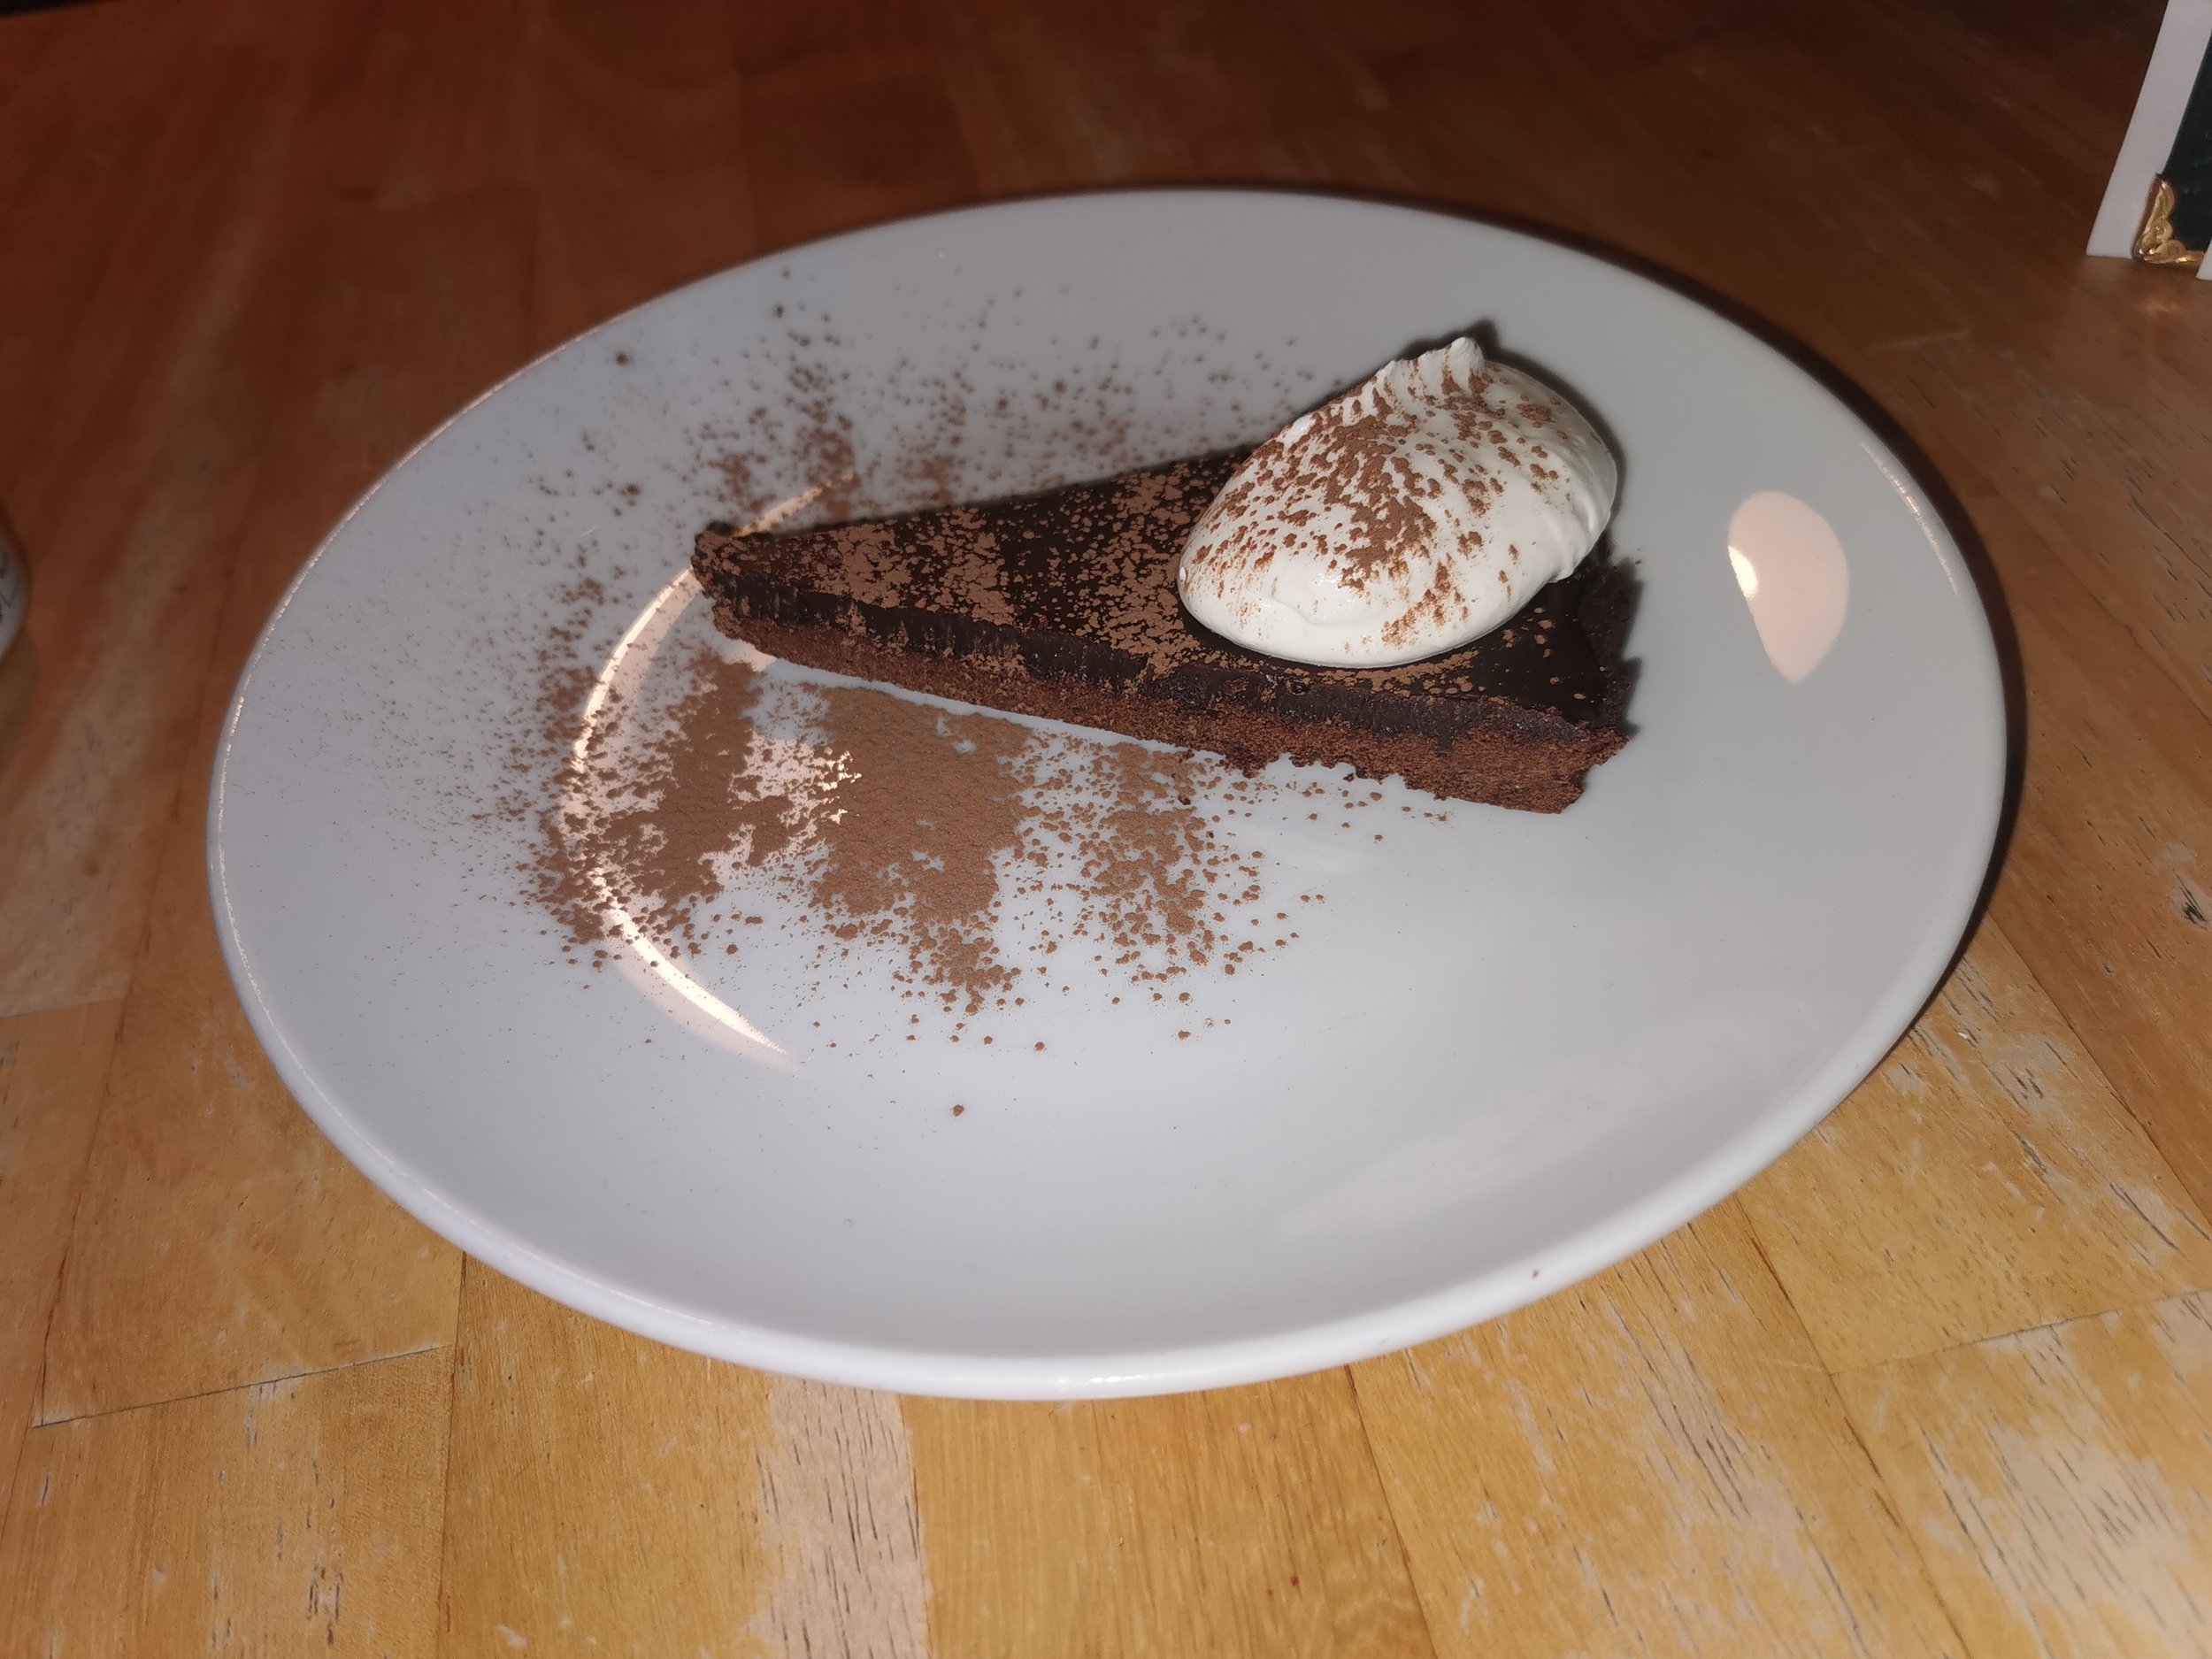 Salted Chocolate Tart and Chantilly Cream (without the Maraschino cherries)